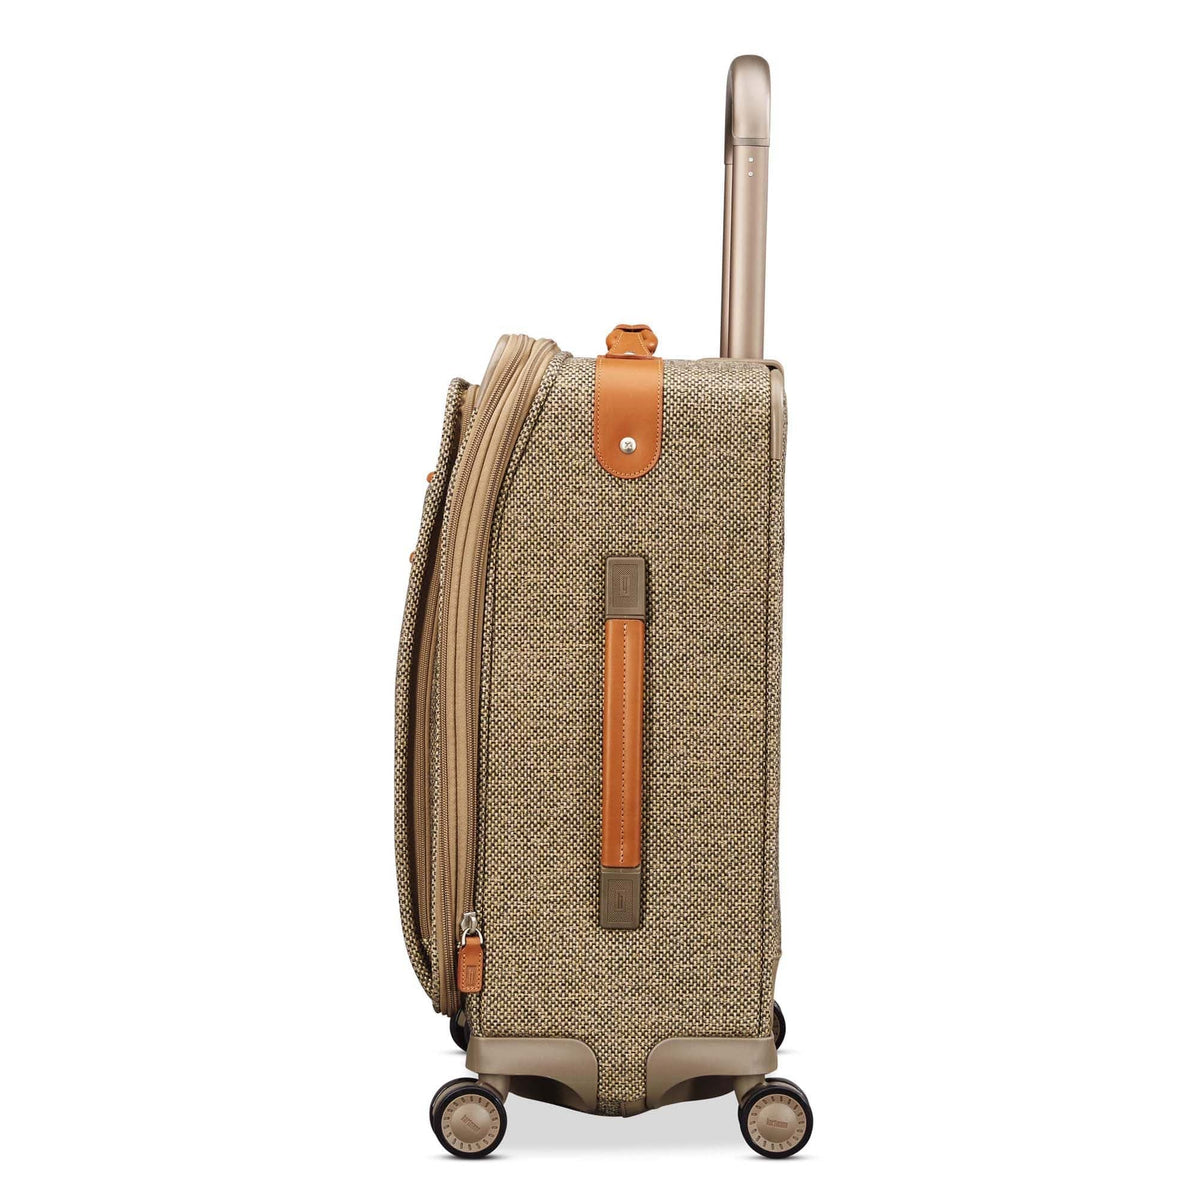 Hartmann Tweed Legend Softside Domestic Carry-On Expandable Spinner Luggage